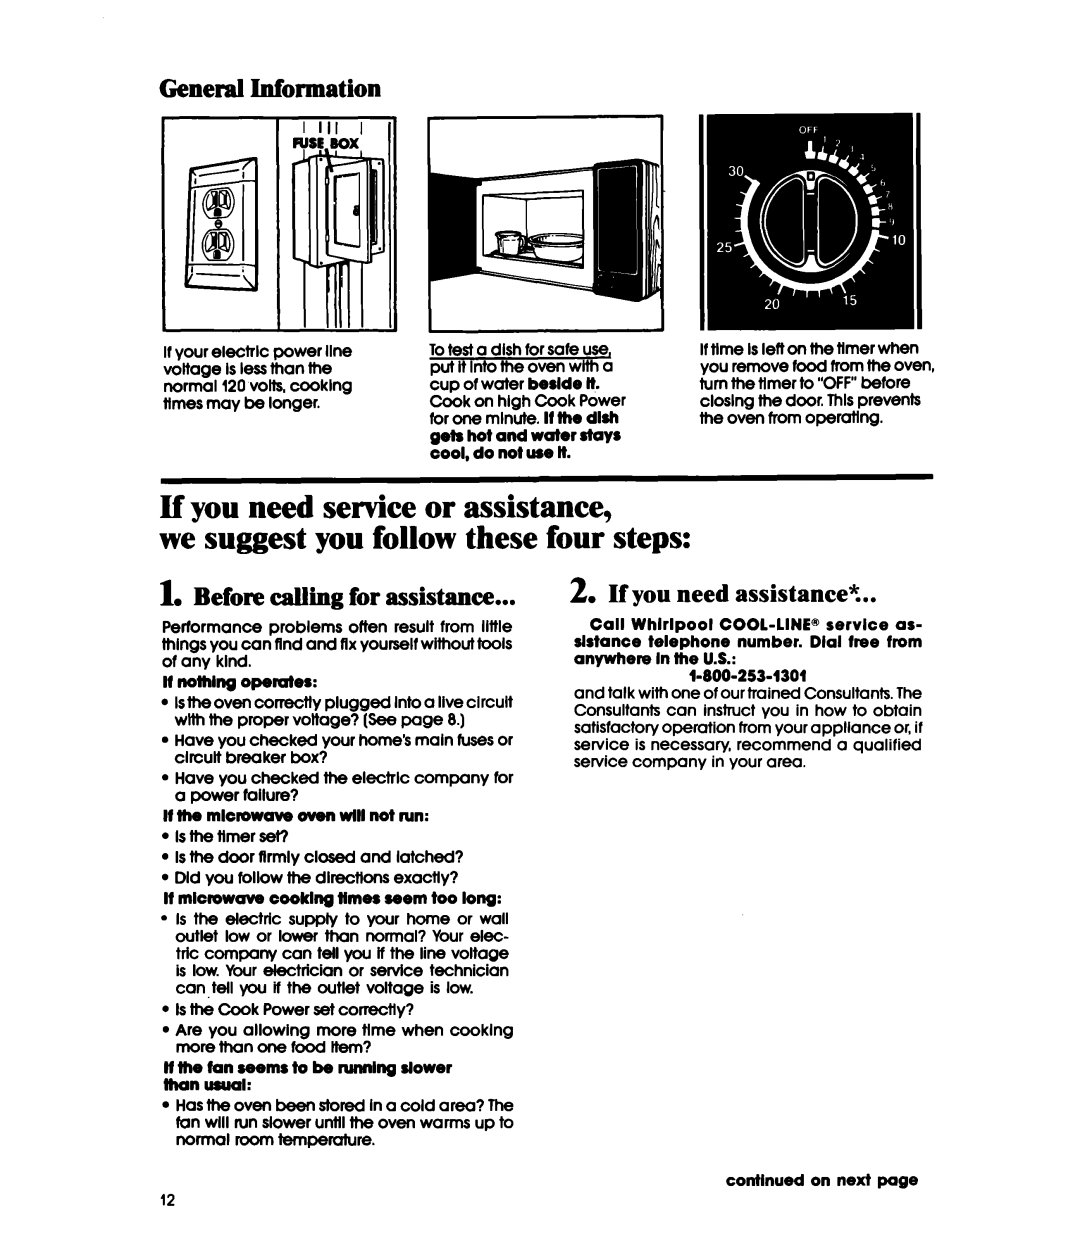 Whirlpool MW1200XW manual If you need service or assistance, we suggest you follow these four steps, General Information 